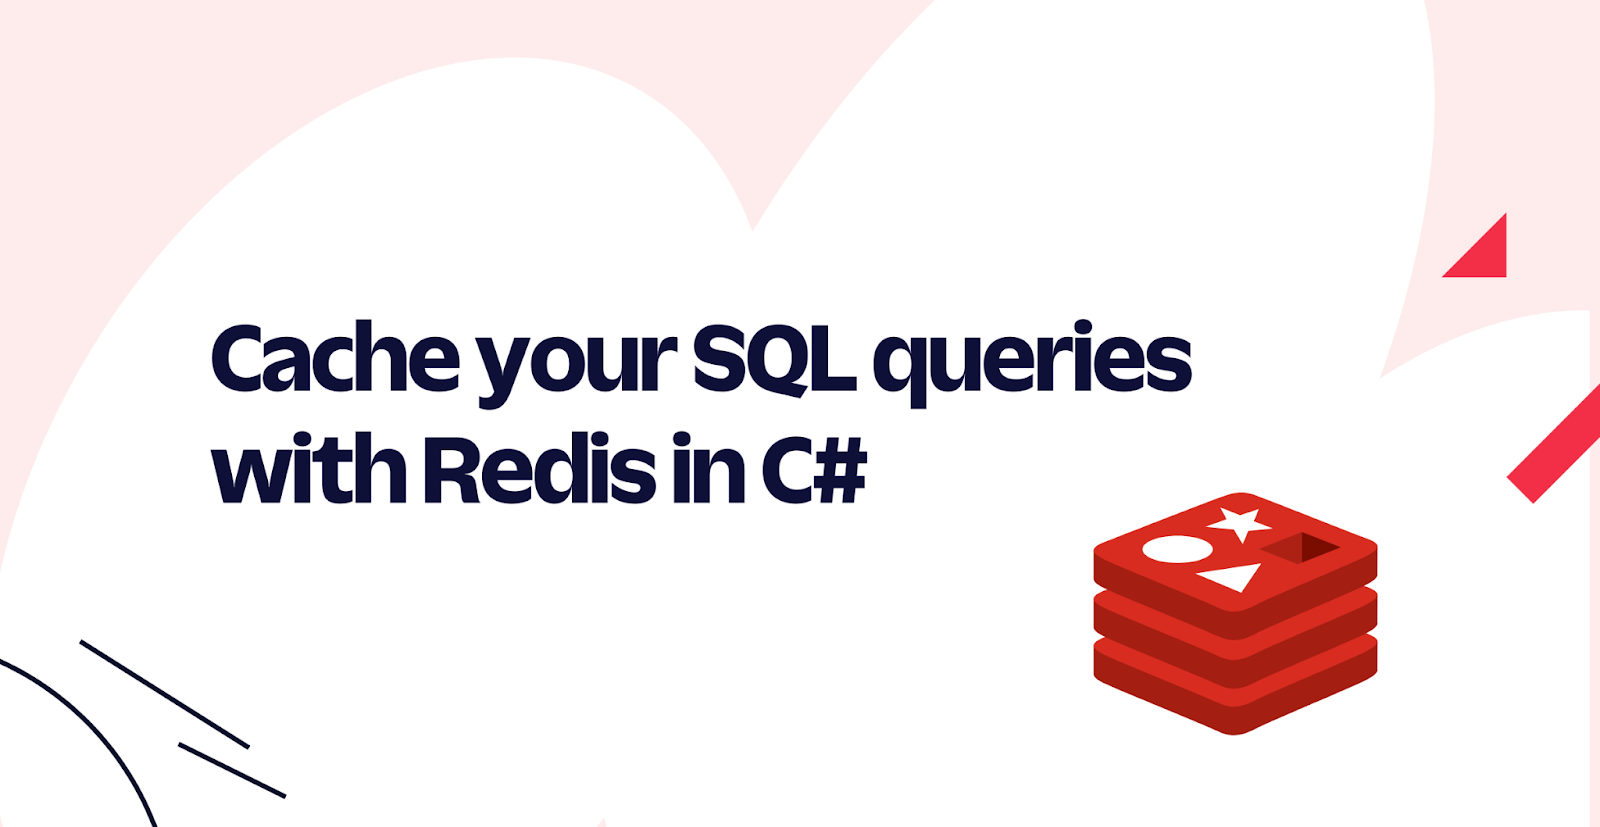 Cache your SQL queries with Redis in C#